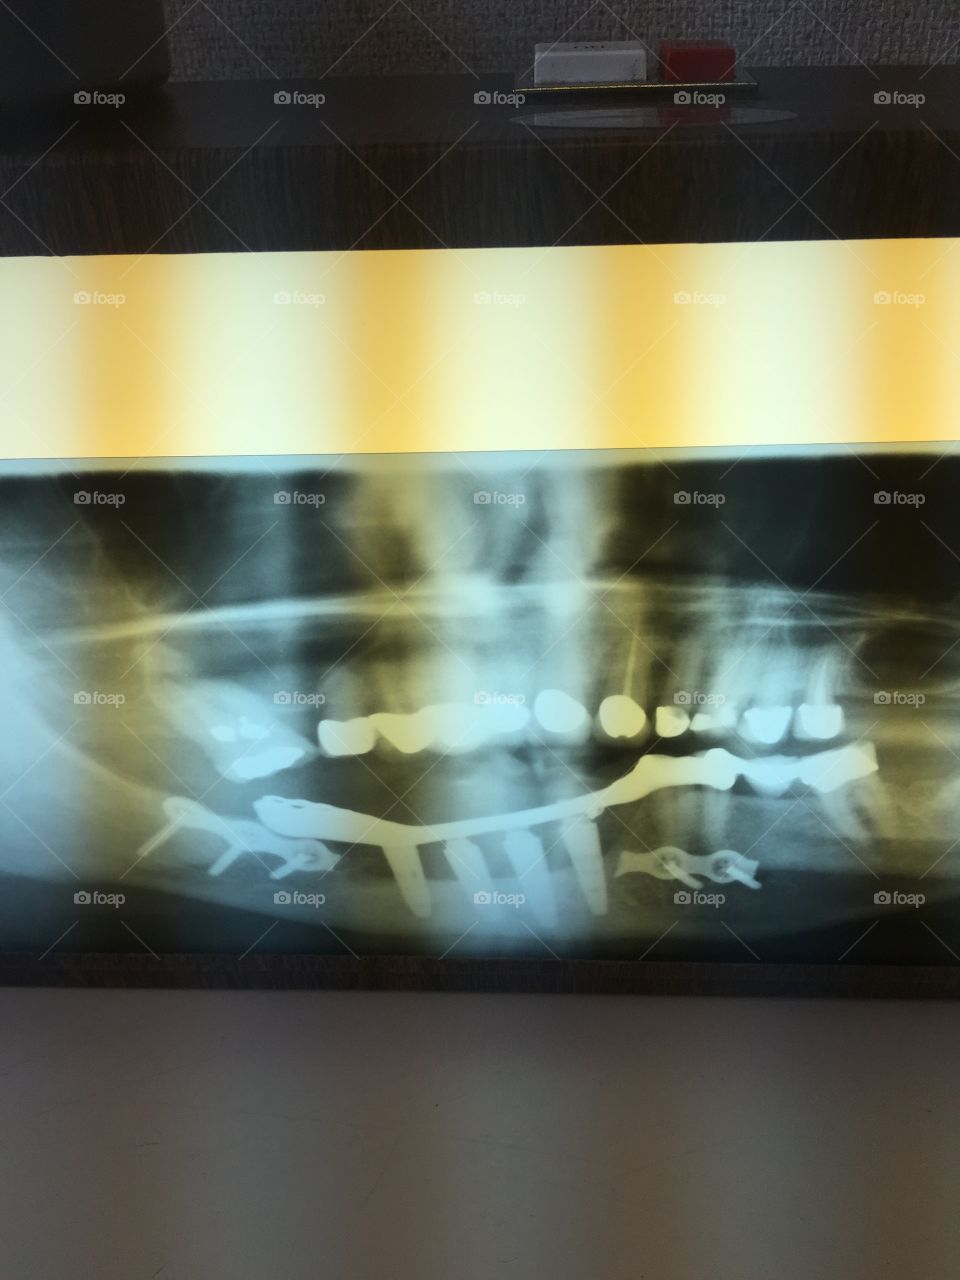 X-ray. Jaw. Titanium. Implant. Teeth. Mouth. Crowns. Reconstruction. Pain. Extensive. Expensive. Dental work. Surgery. Screws. 